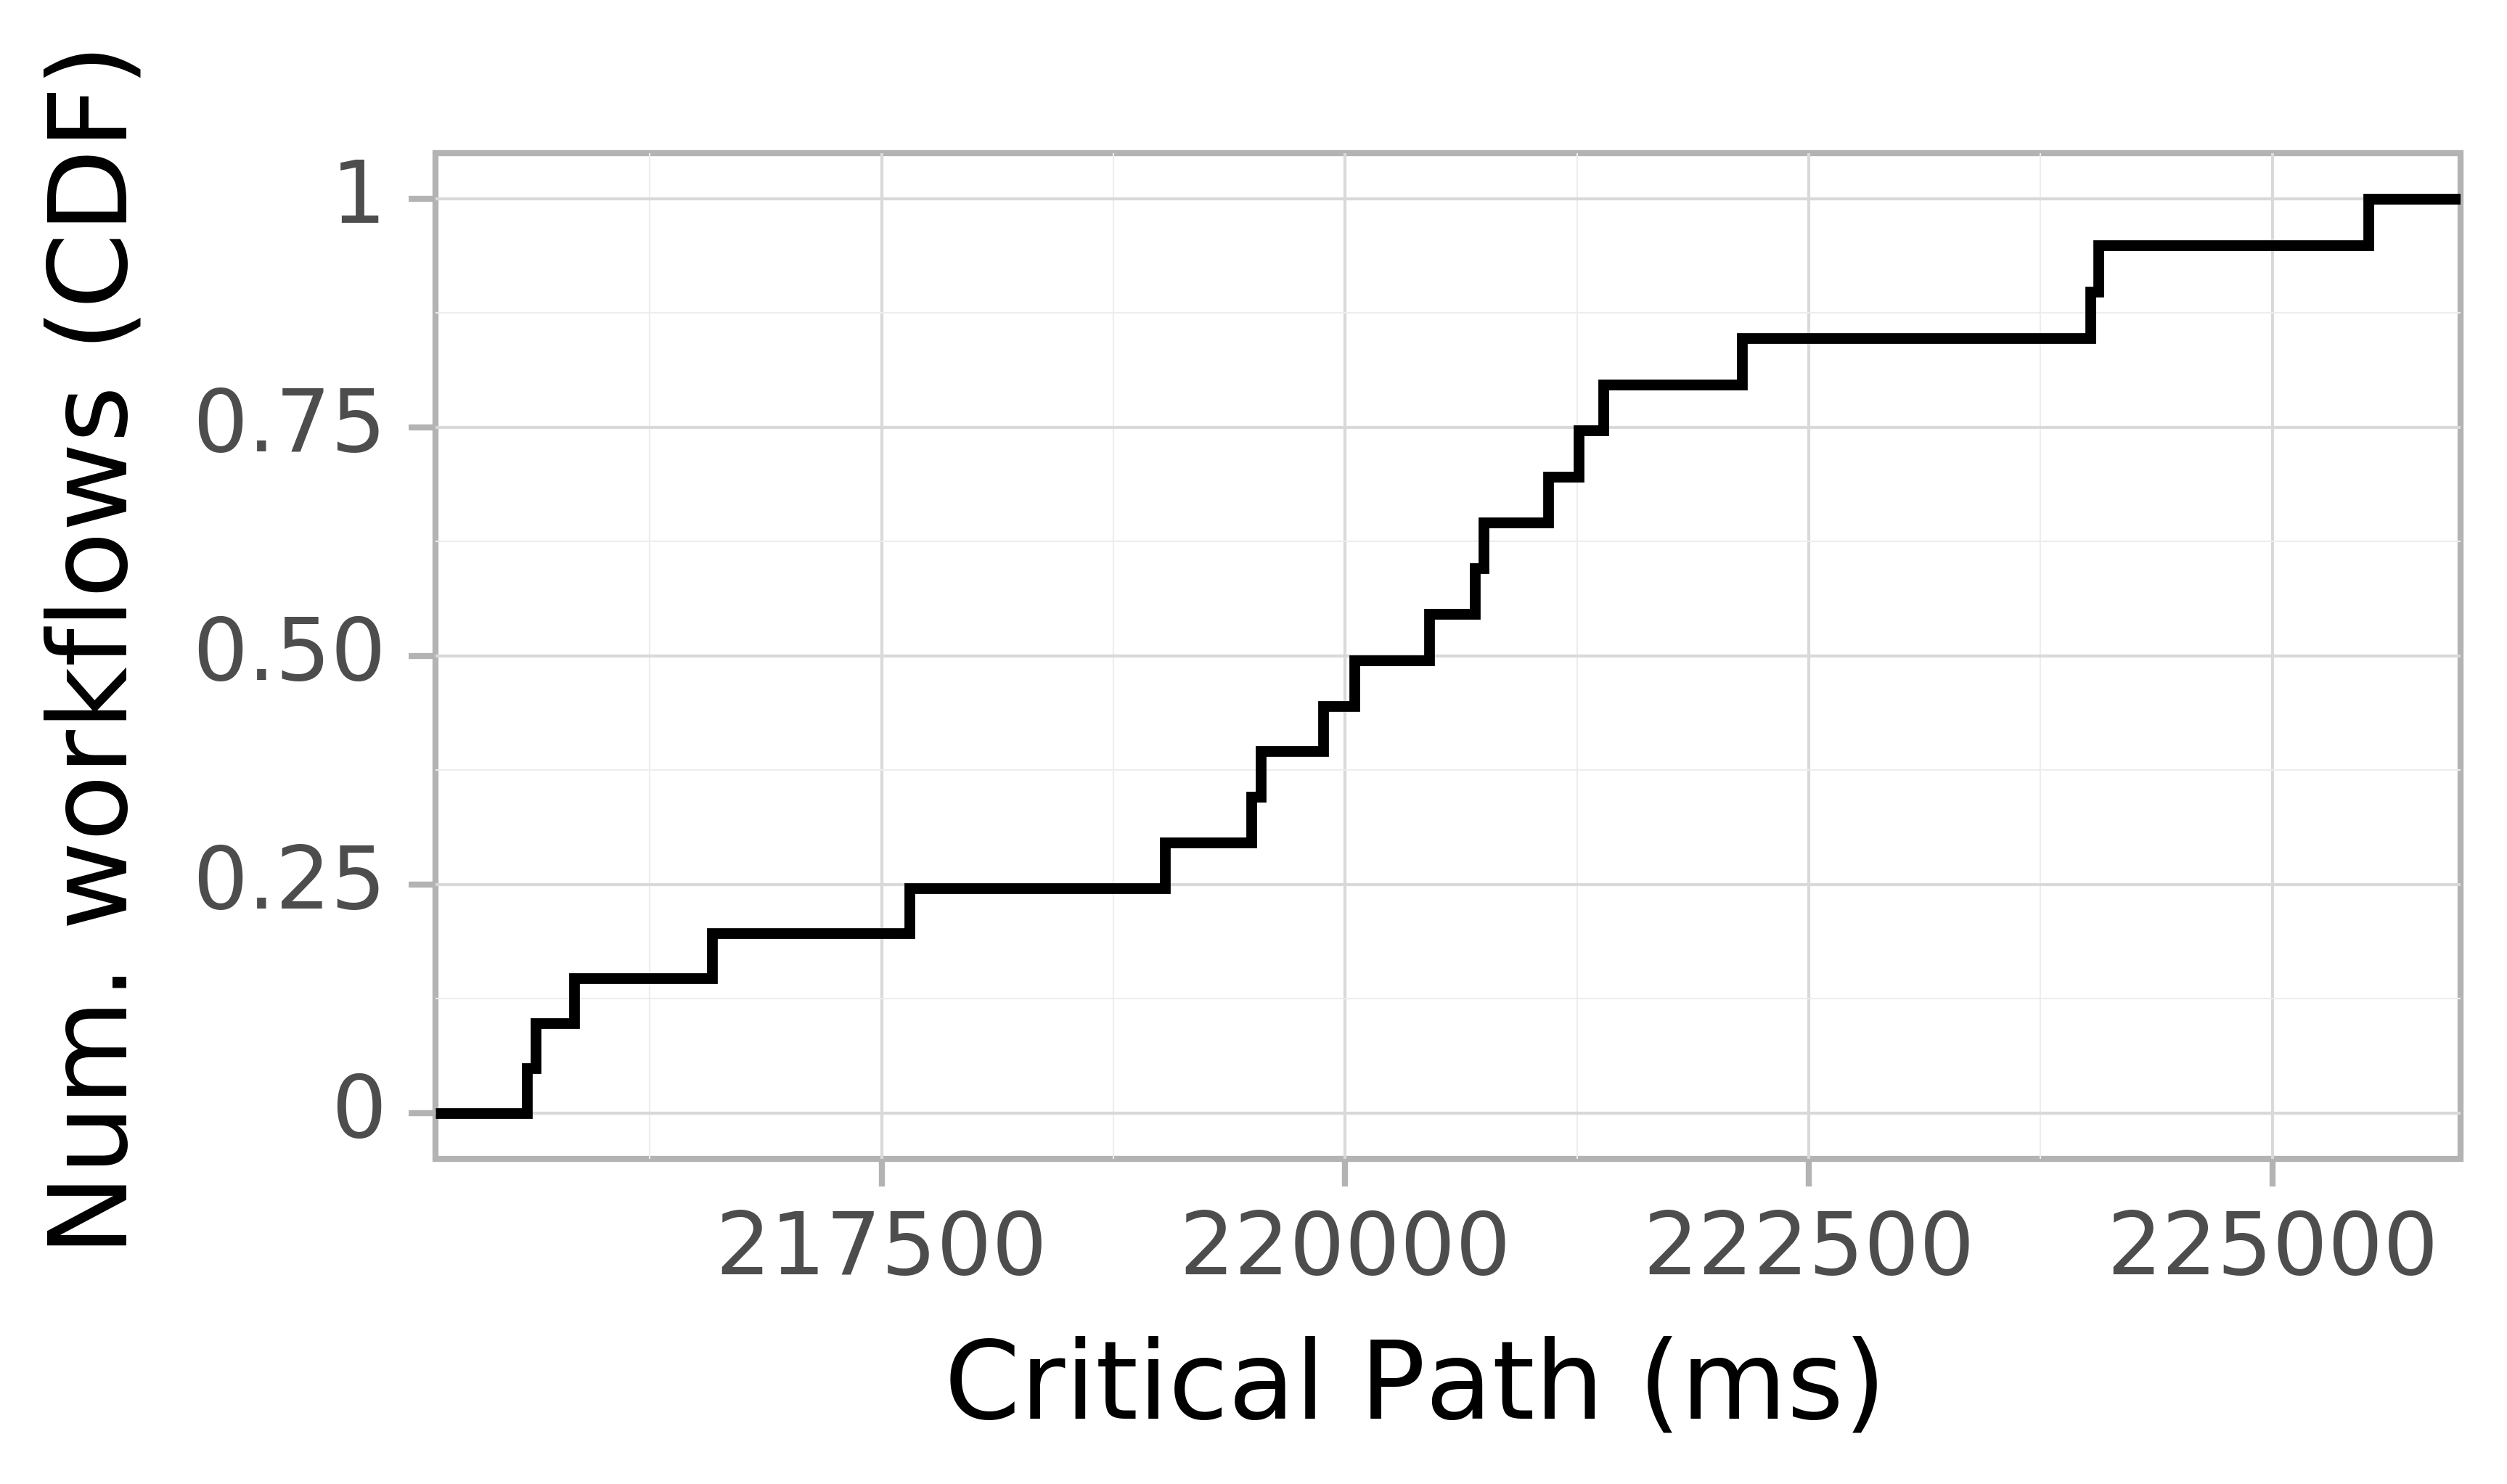 Job runtime CDF graph for the askalon-new_ee18 trace.